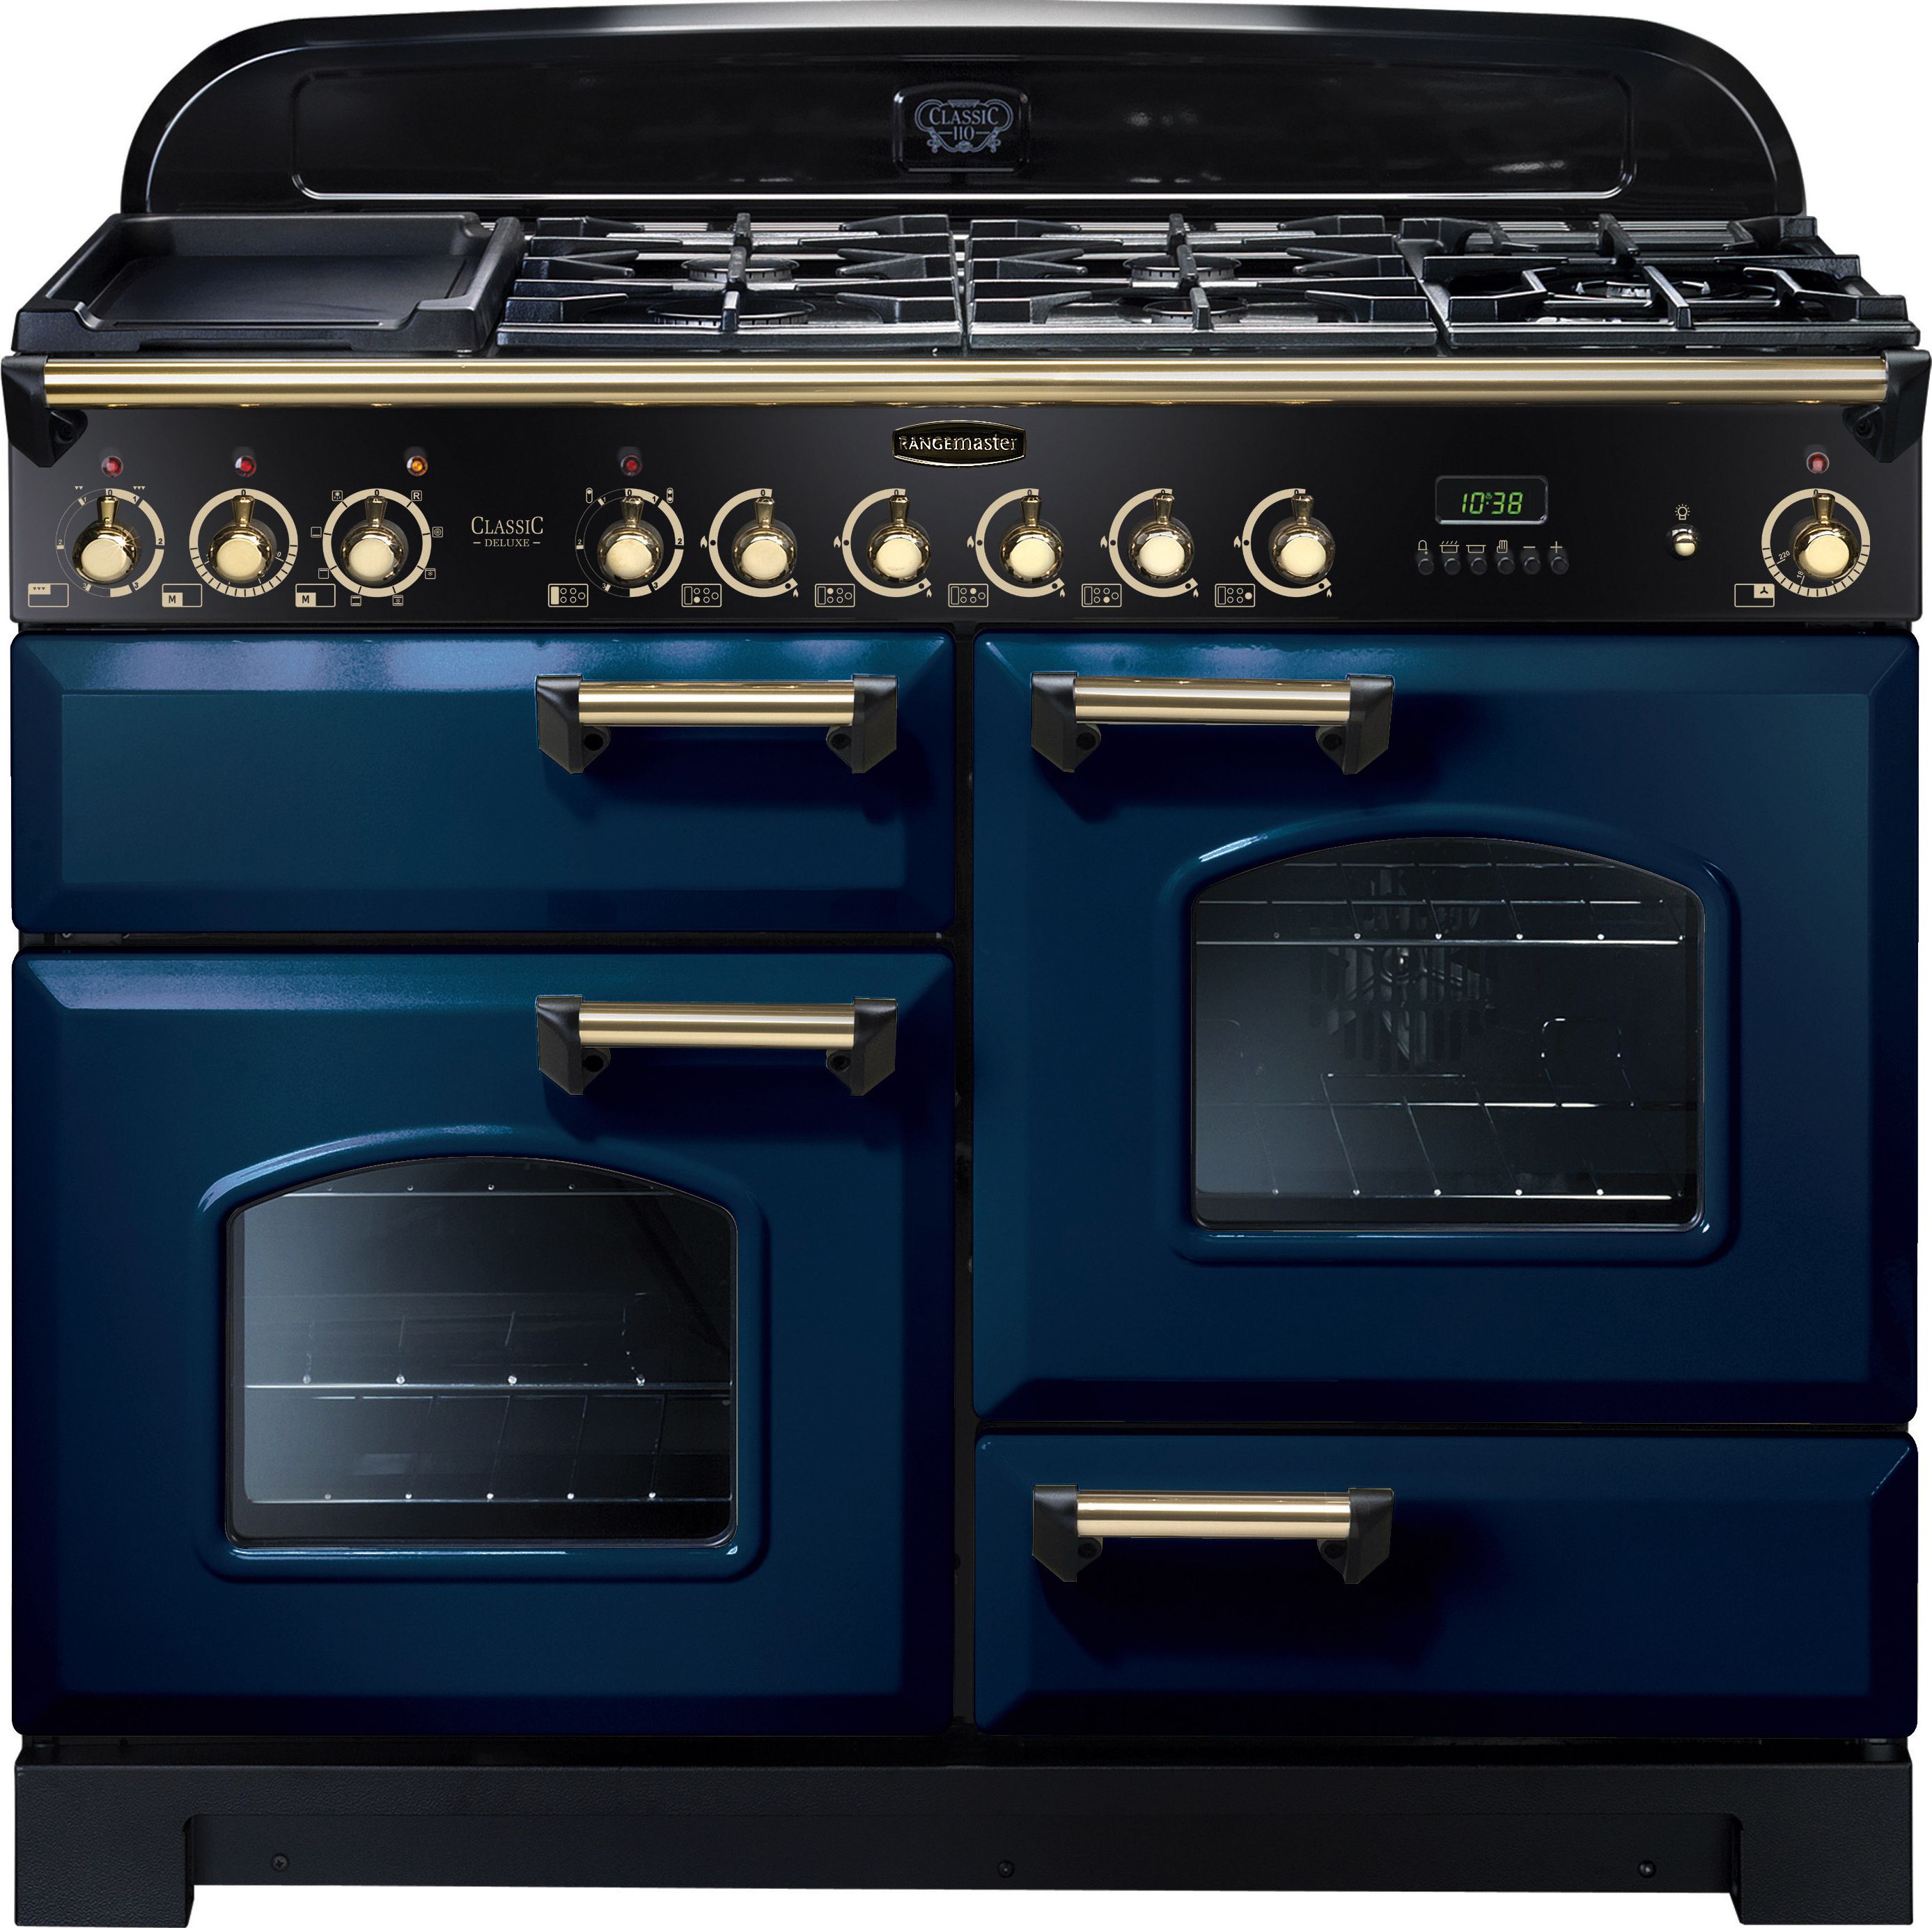 Rangemaster Classic Deluxe CDL110DFFRB/B 110cm Dual Fuel Range Cooker - Regal Blue / Brass - A/A Rated, Blue